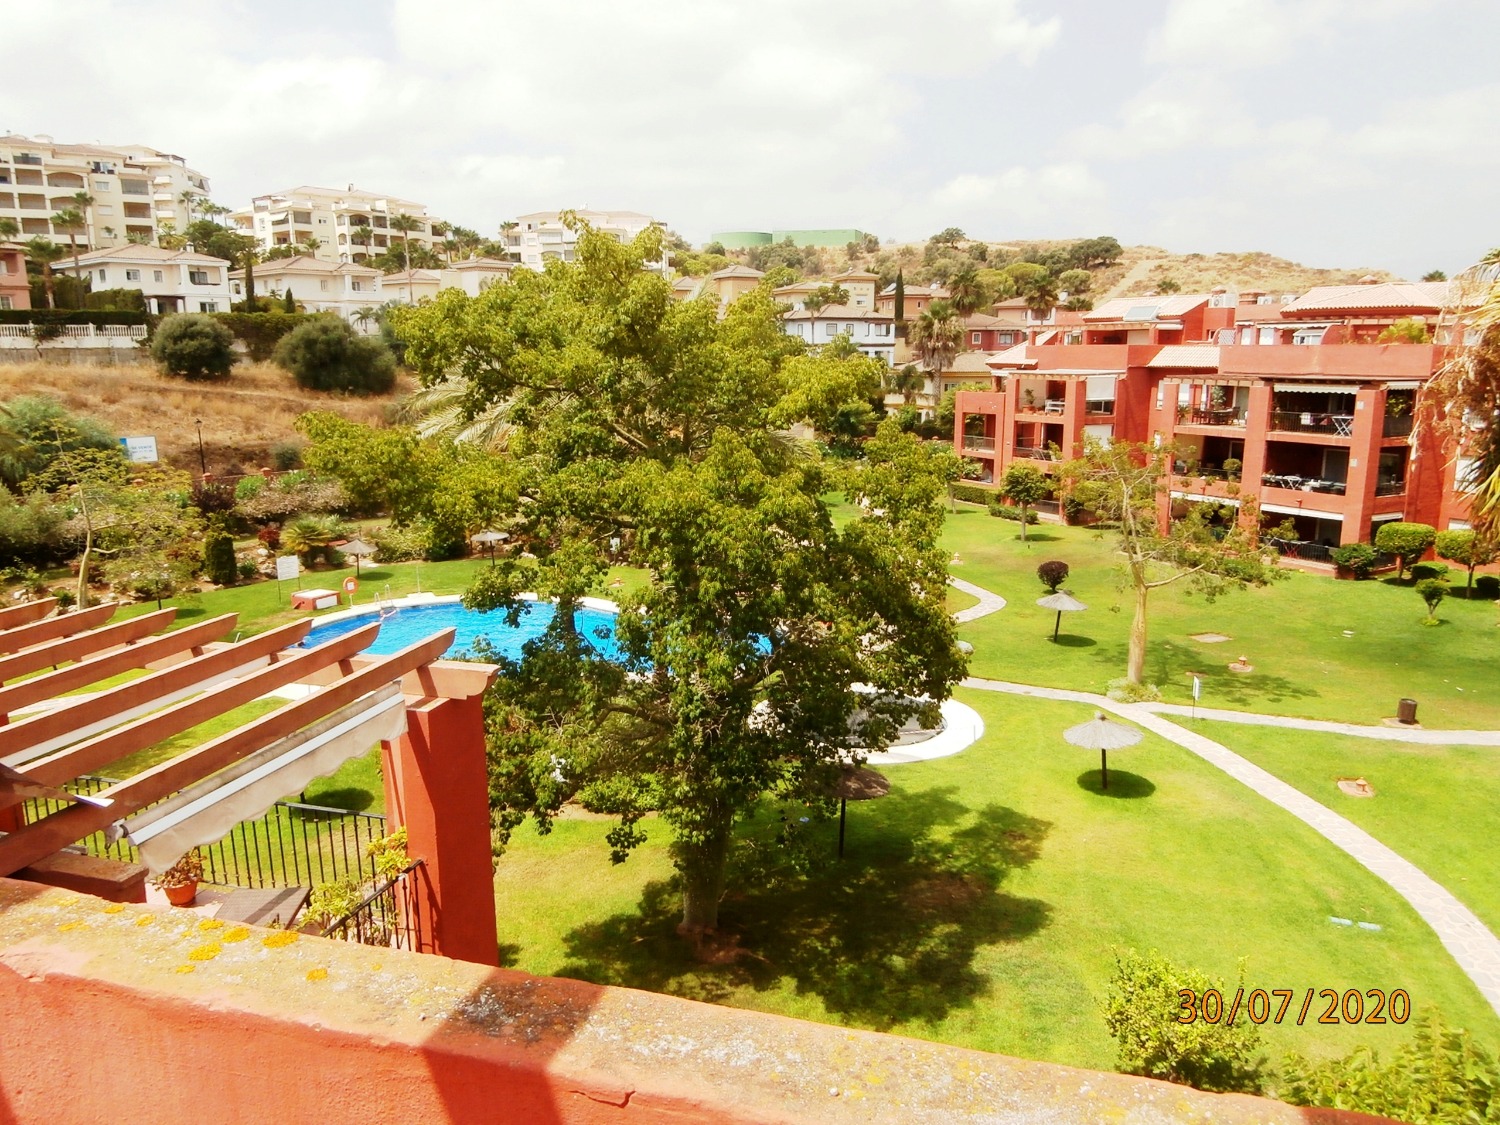 Excellent duplex penthouse very reduced price for quick a sale, located in exclusive gated community.